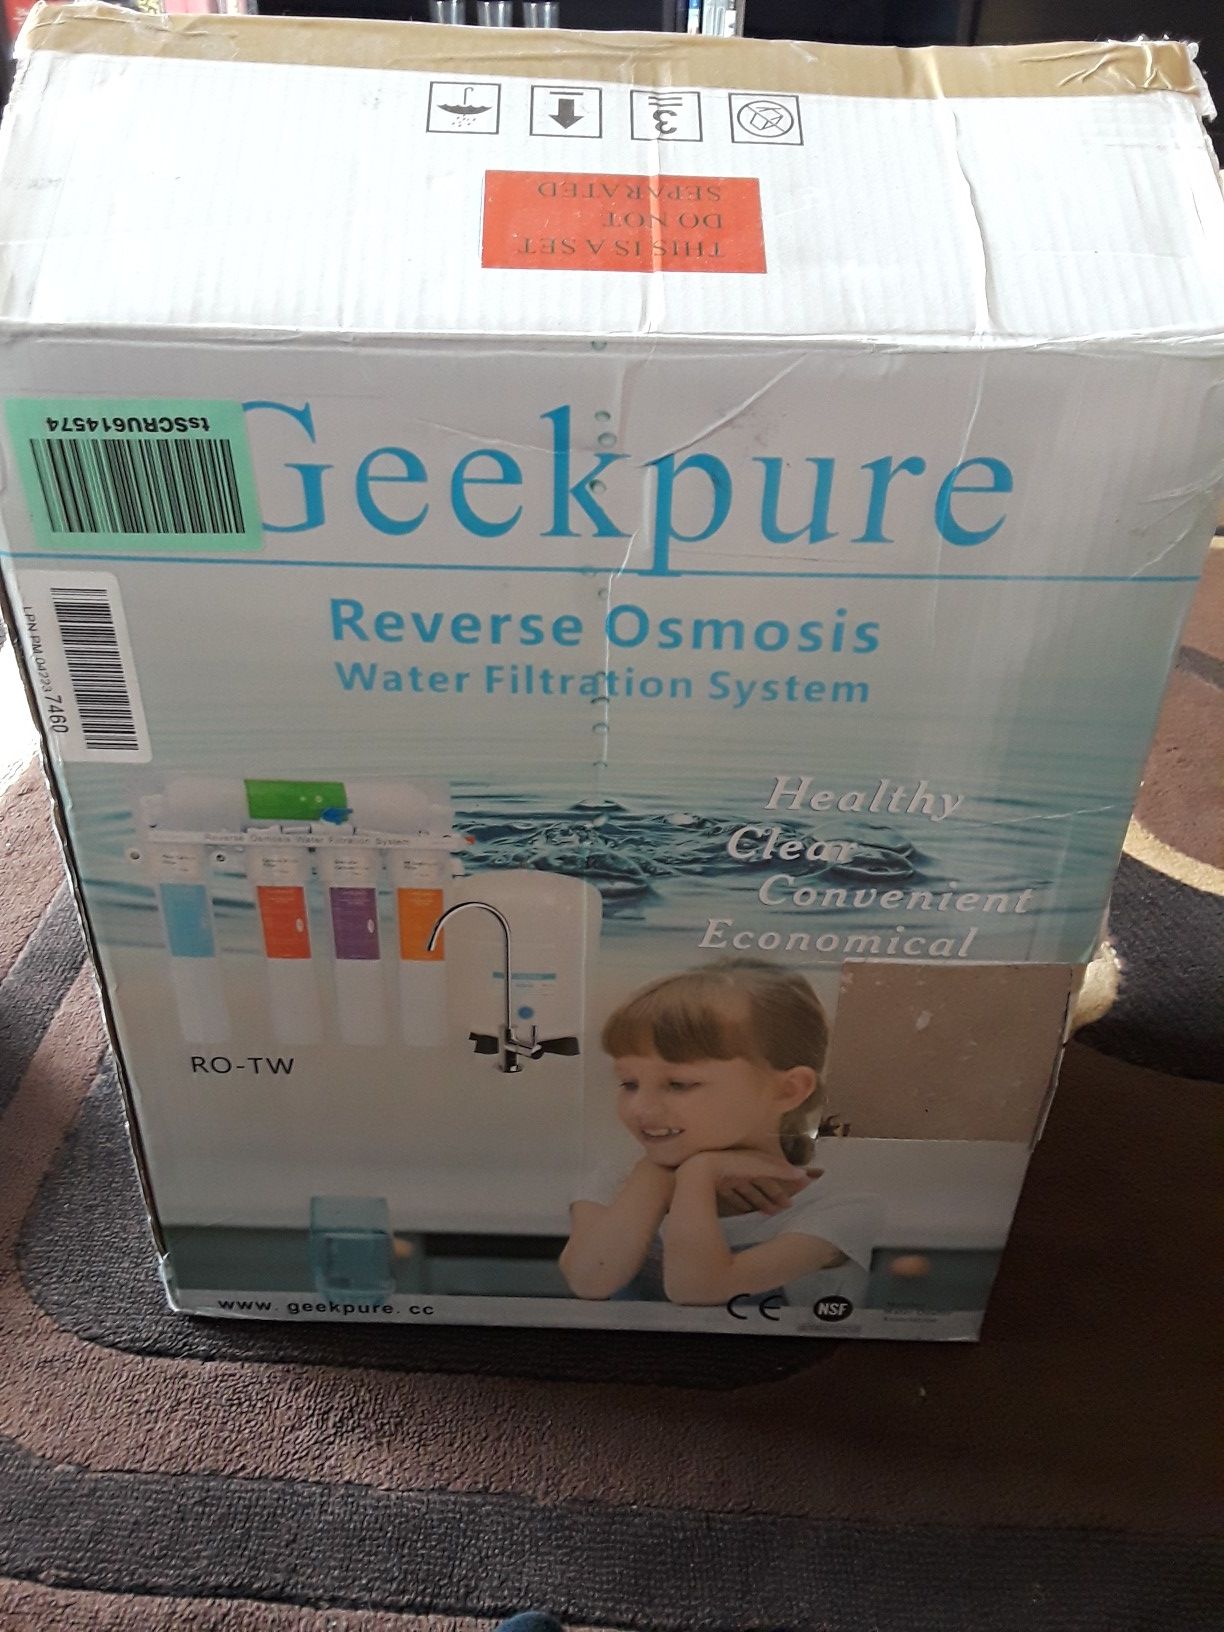 Greek pure reverse osmosis water filtration system